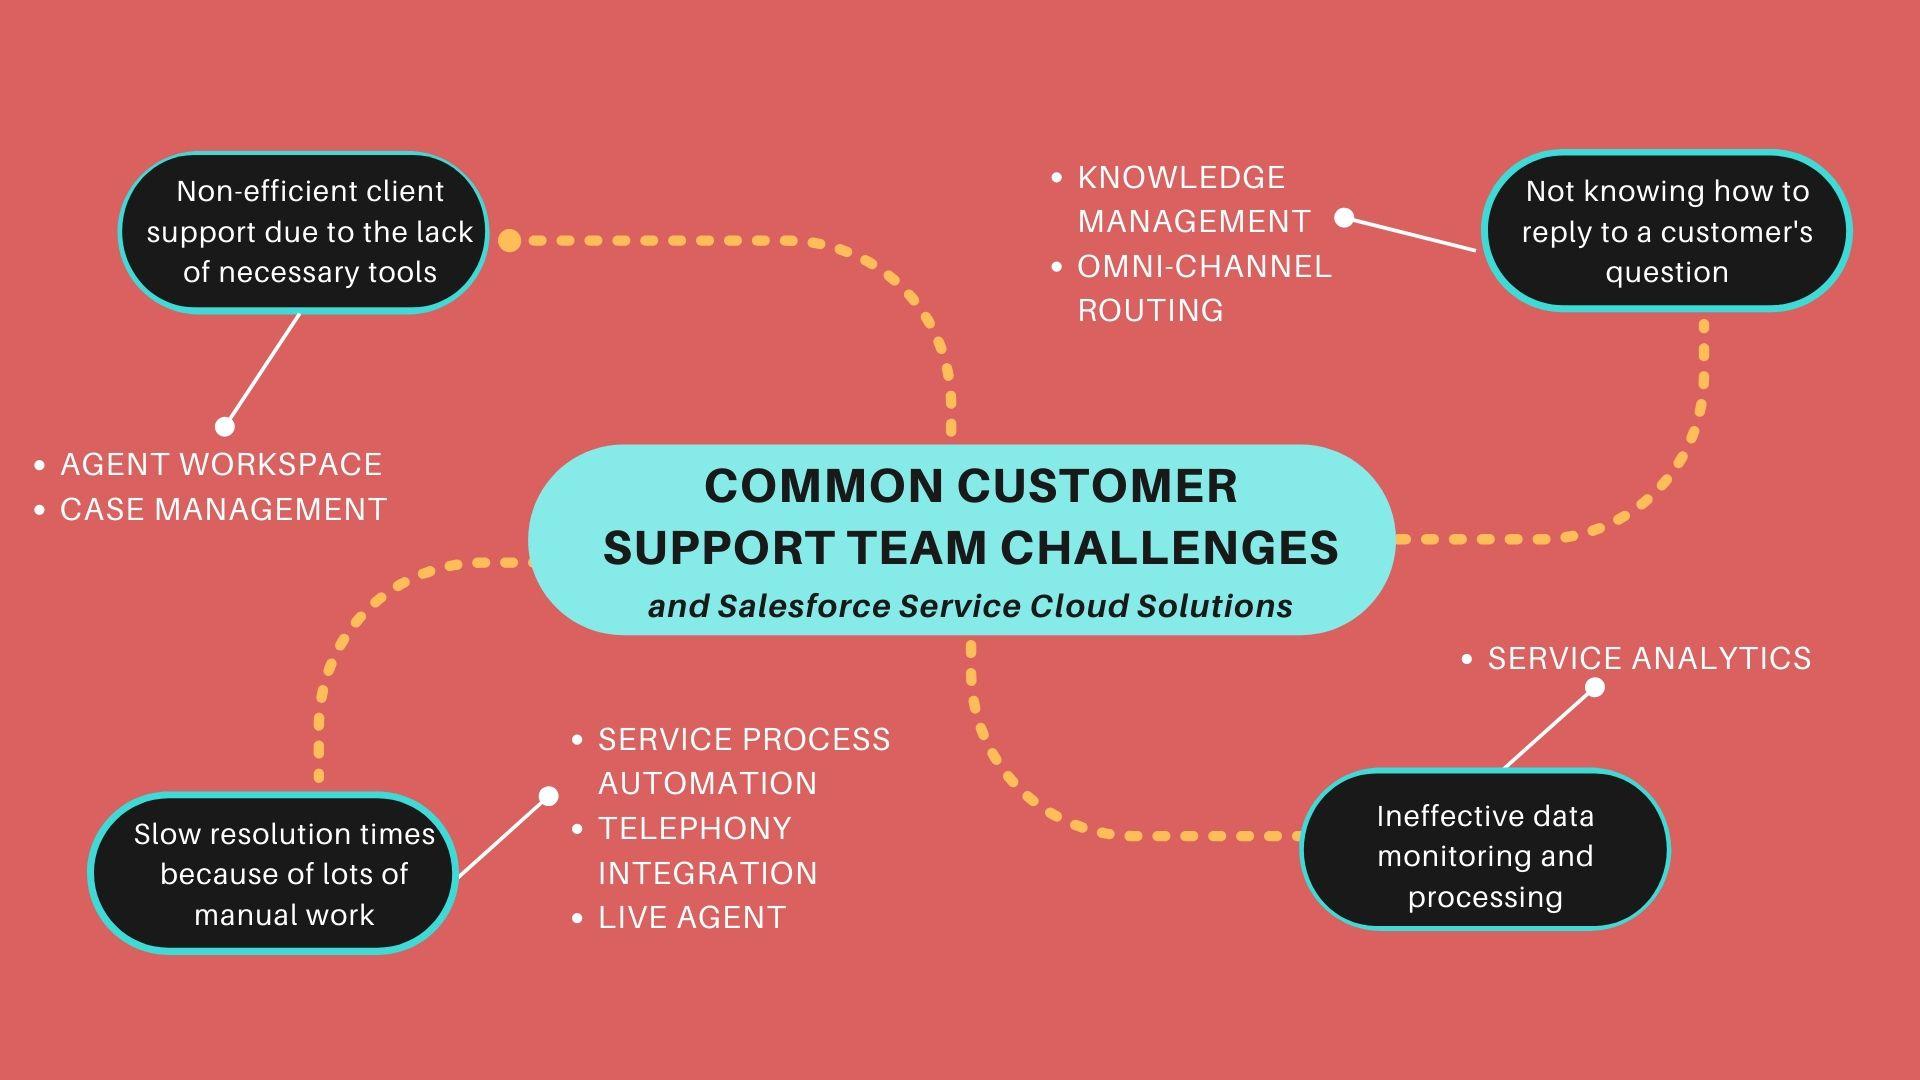 customer support challenges solved using Service Cloud